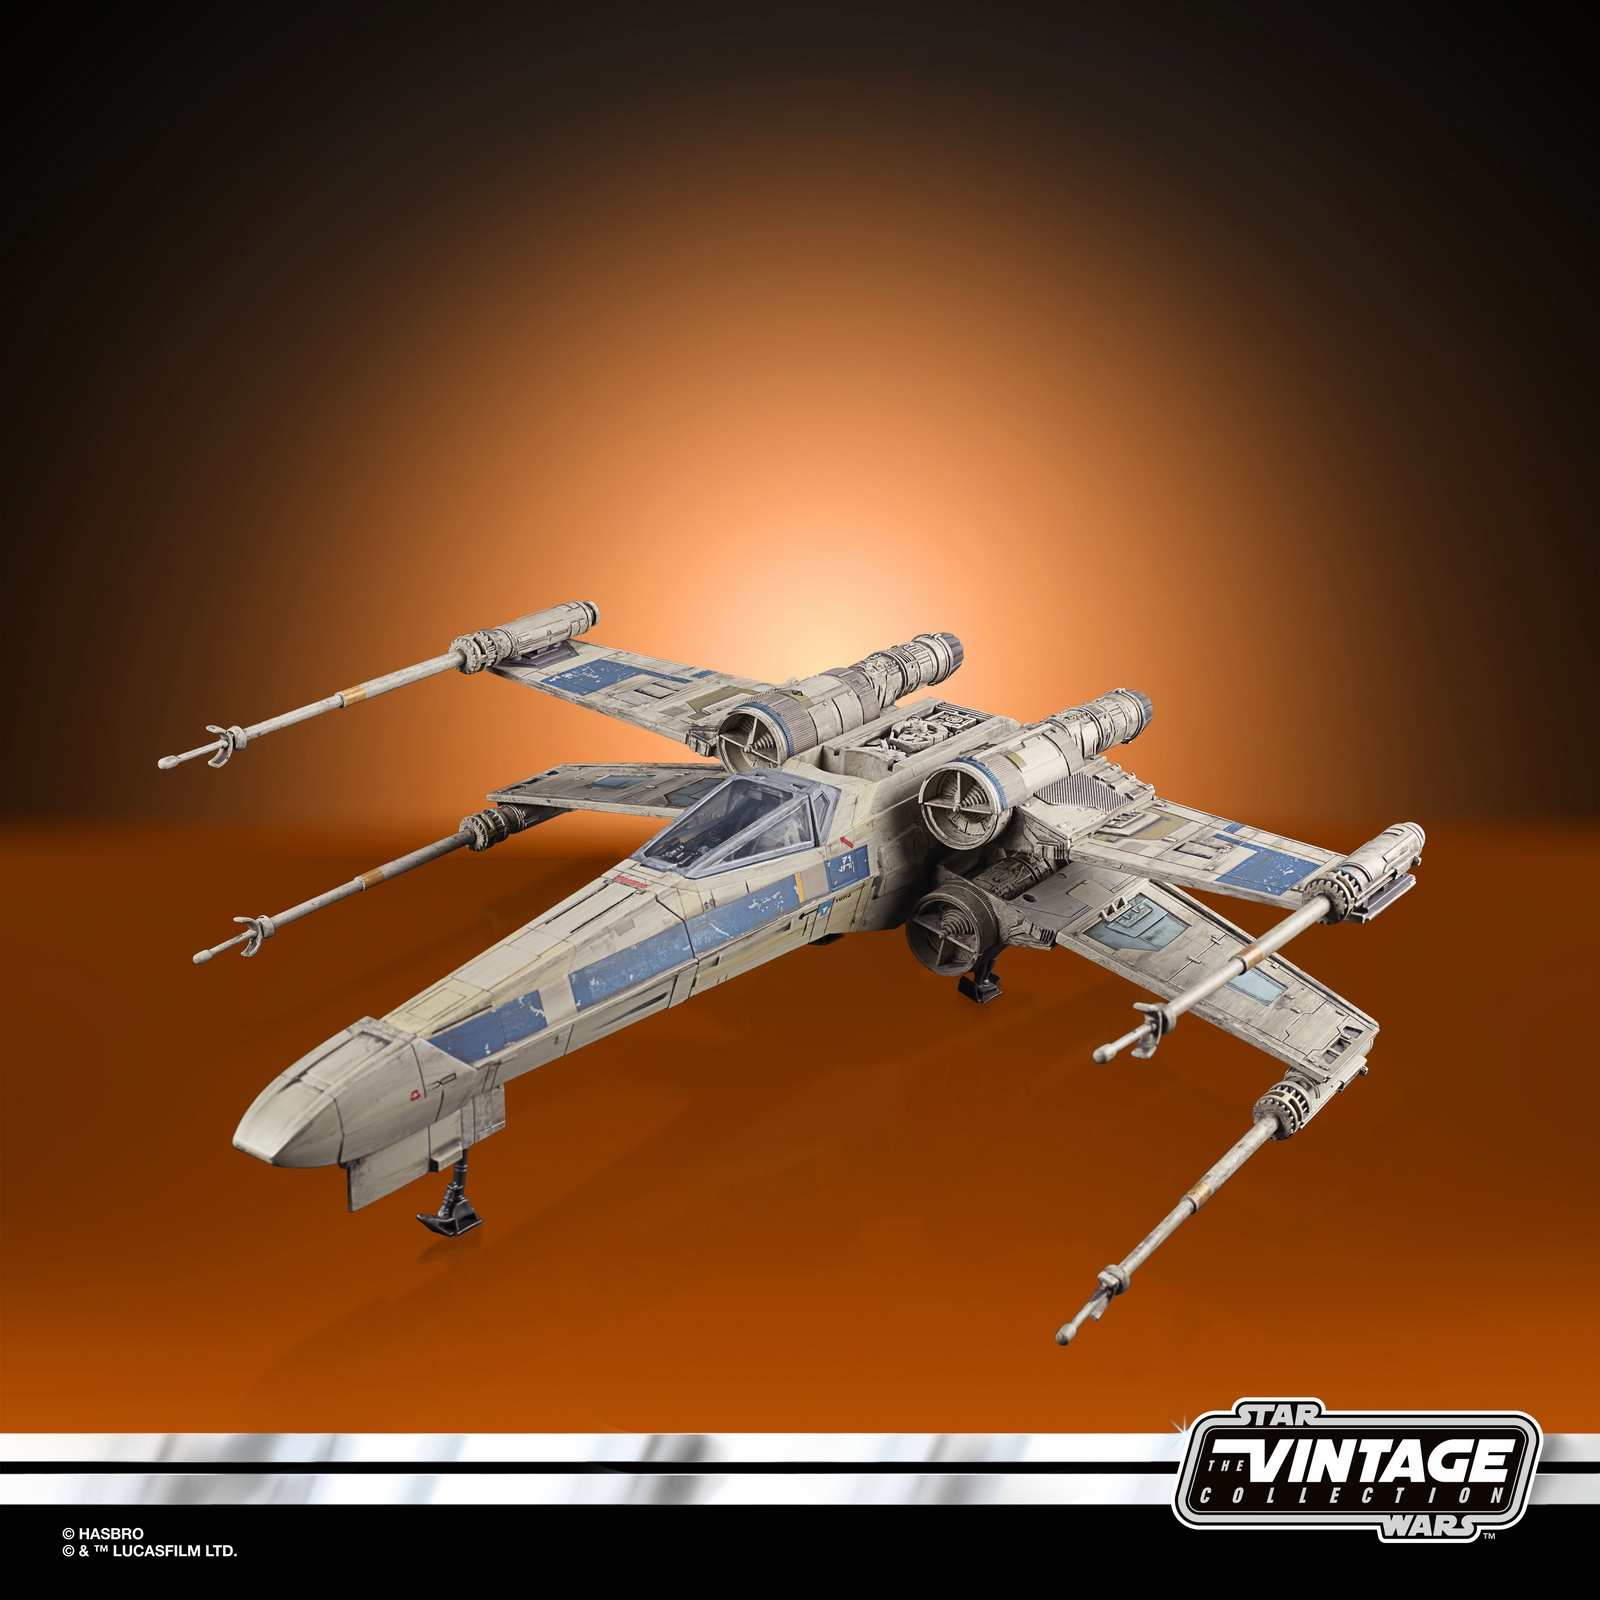 STAR WARS THE VINTAGE COLLECTION ANTOC MERRICK’S X-WING FIGHTER Vehicle and Figure - oop 5.jpg